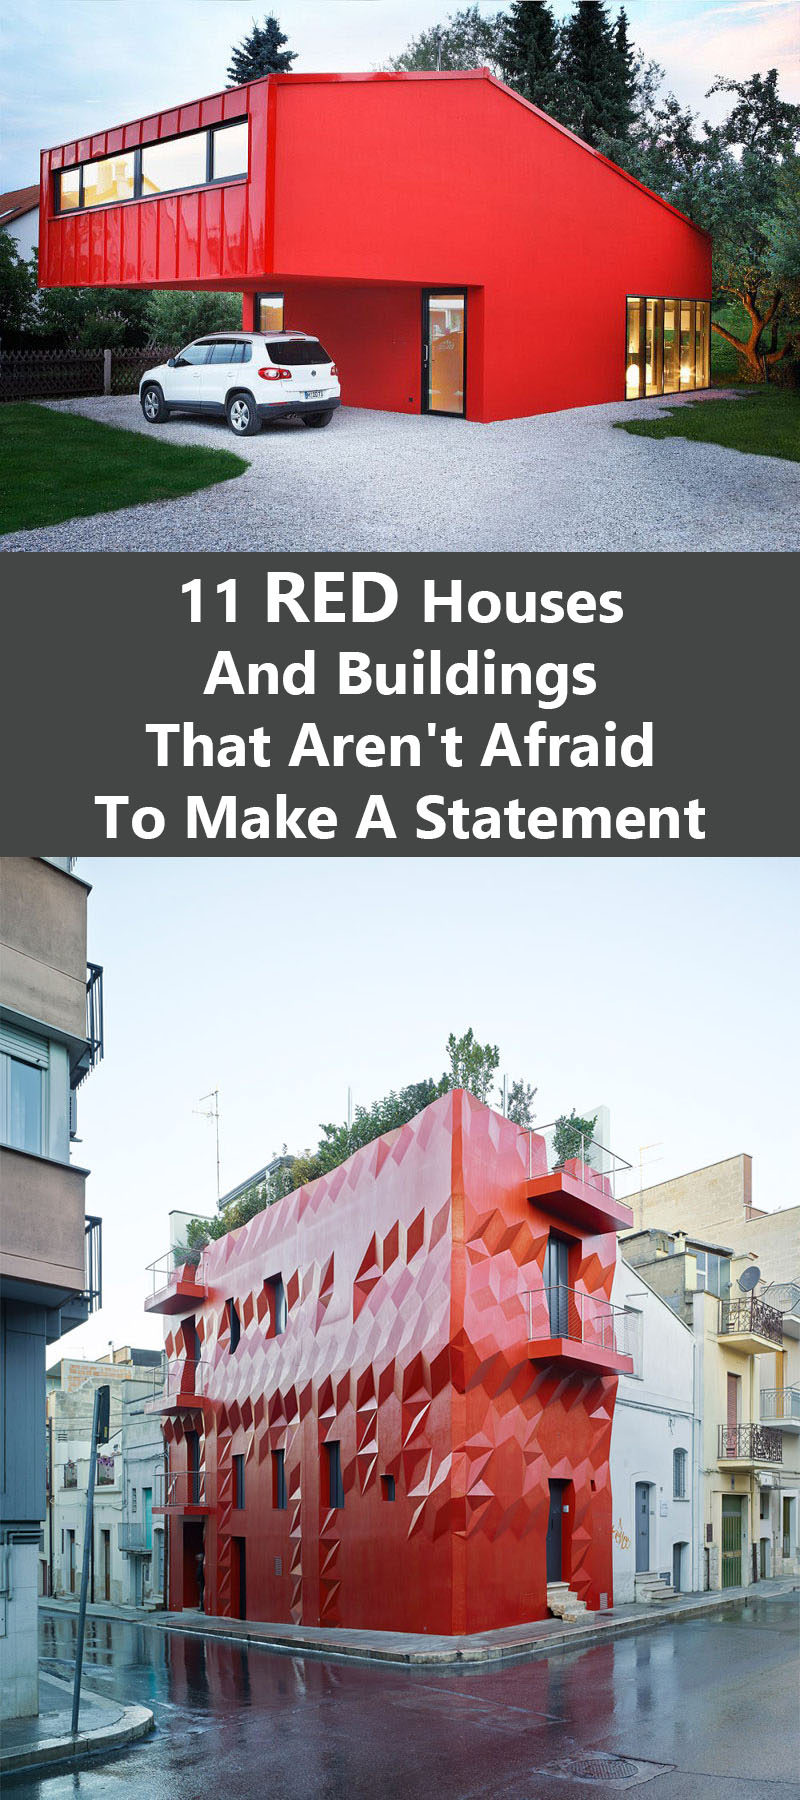 11 Red Houses And Buildings That Aren't Afraid To Make A Statement